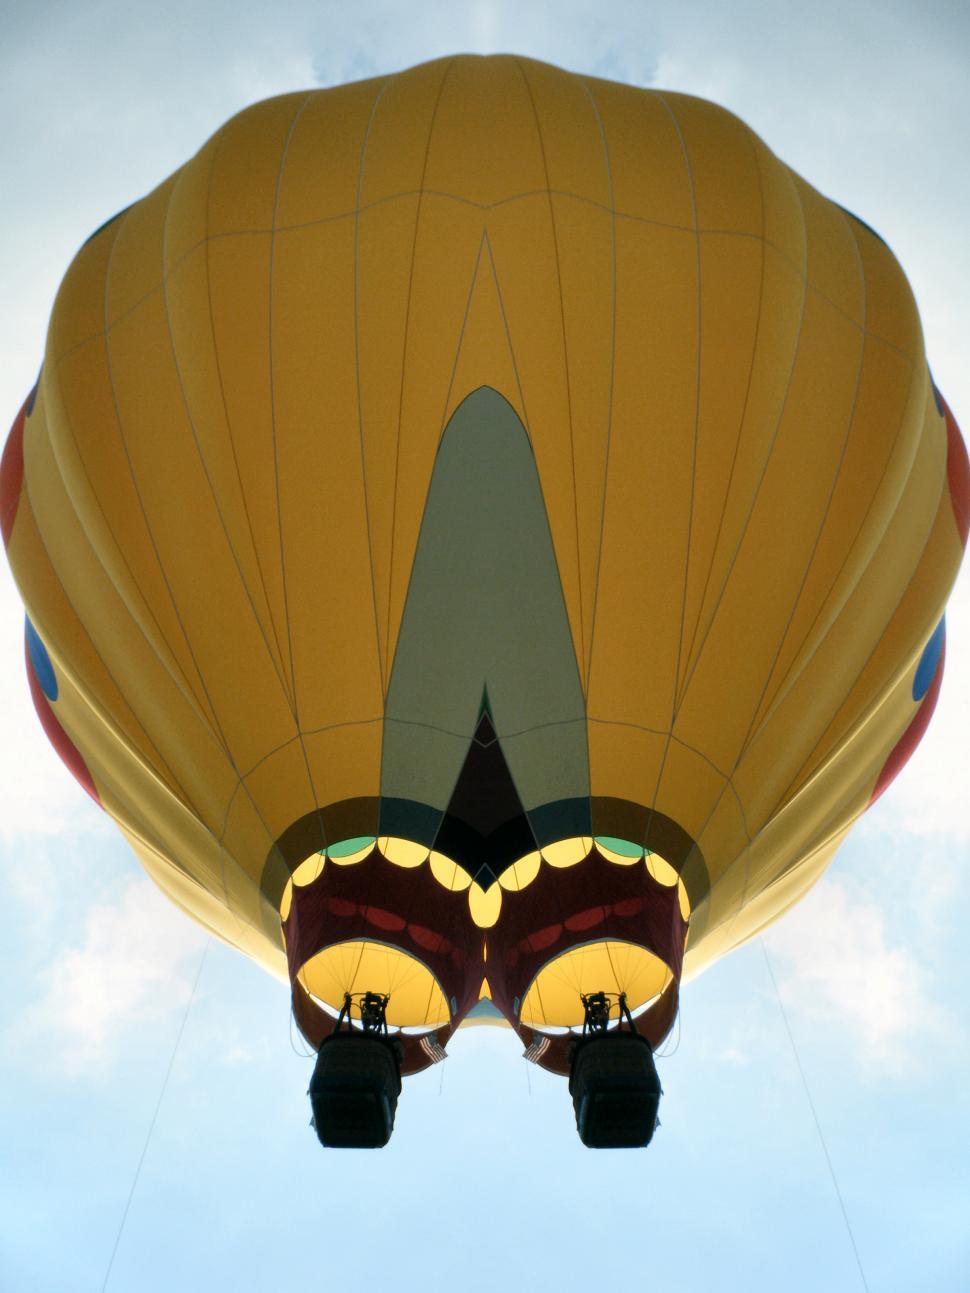 Free Image of Manipulated two bucket basket hot air balloon 